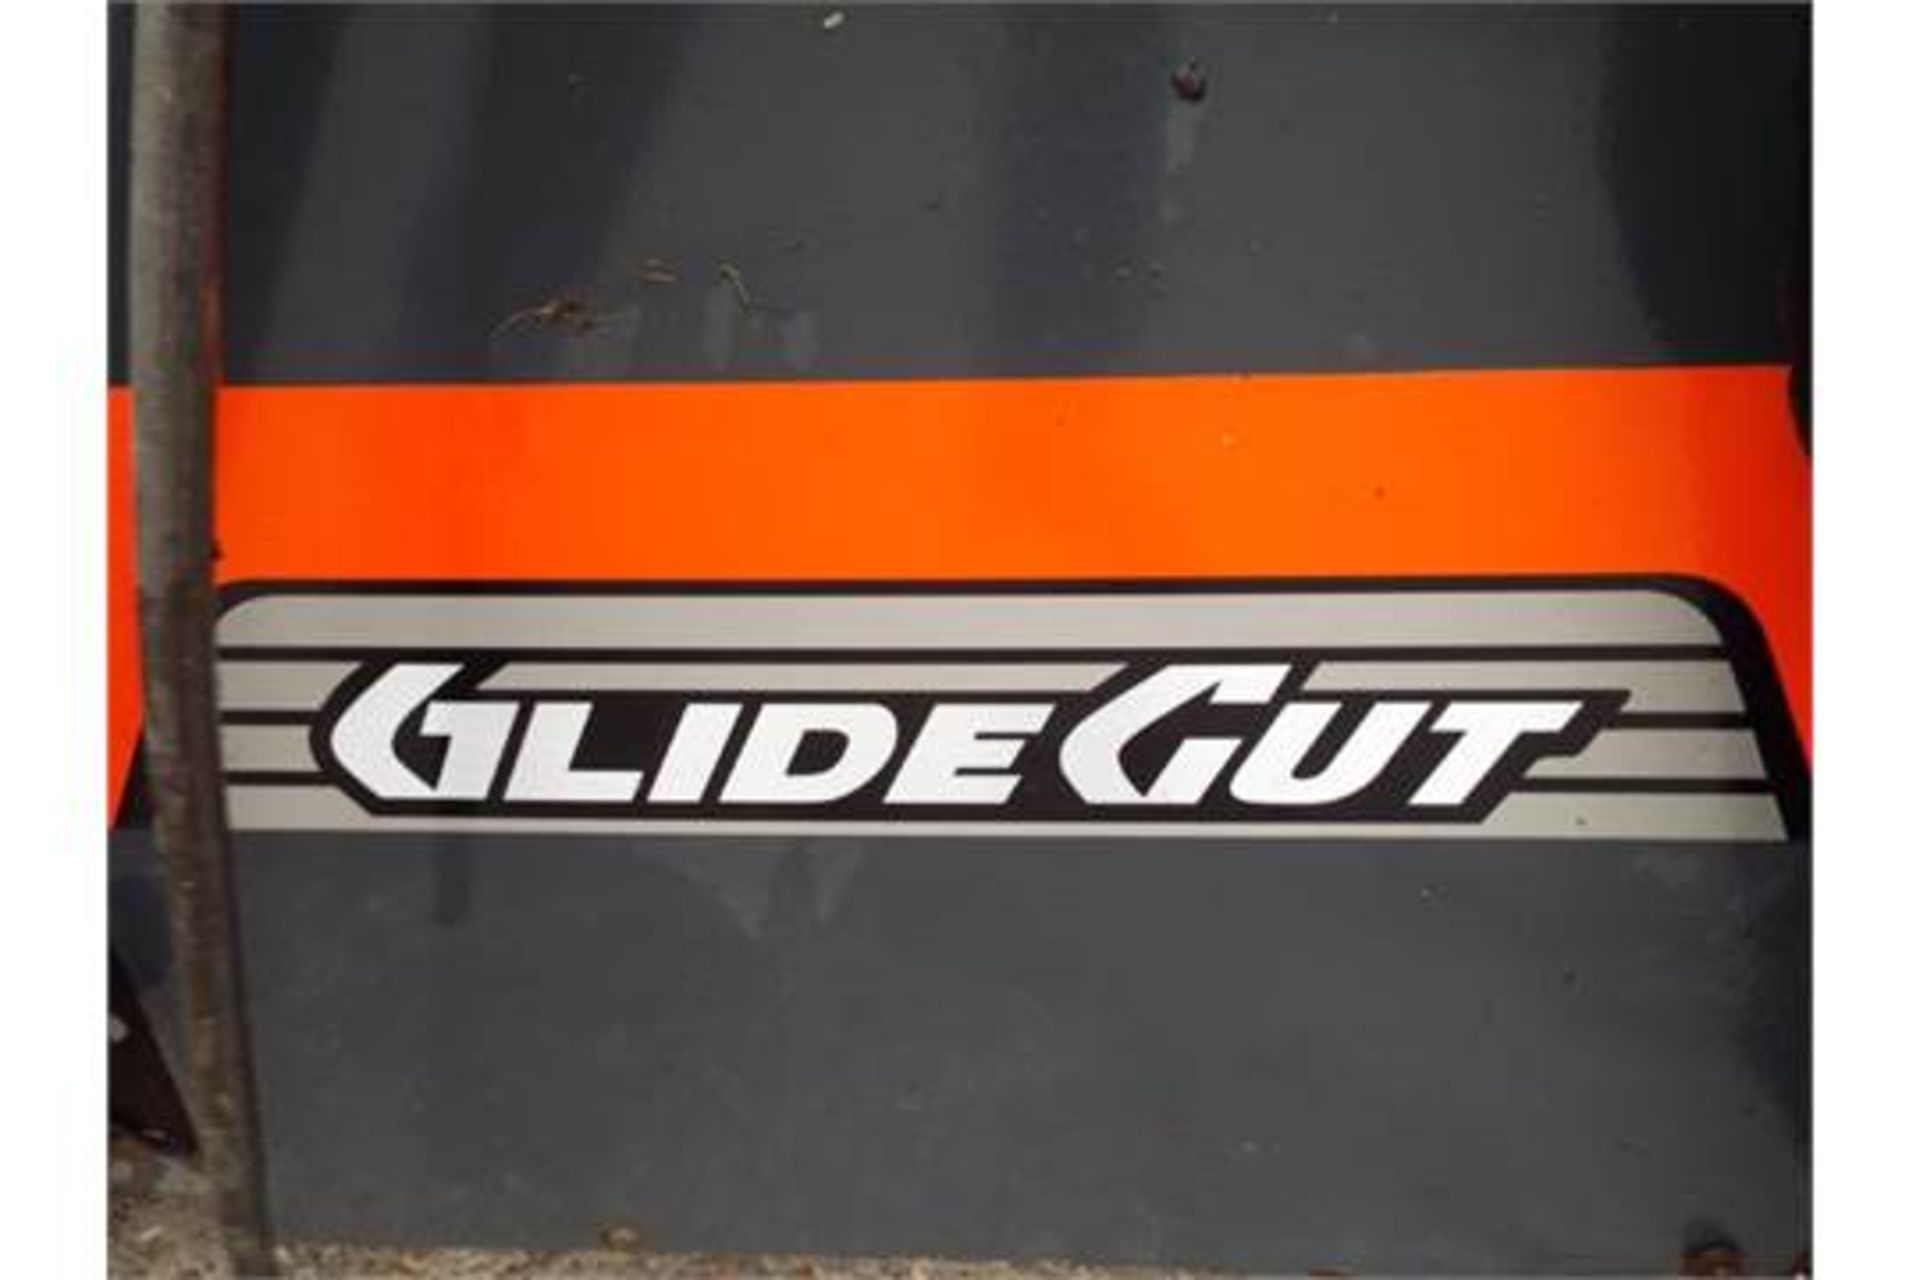 2008 Kubota G21 Ride On Mower with Glide-Cut System and High Dump Grass Collector - Image 21 of 22